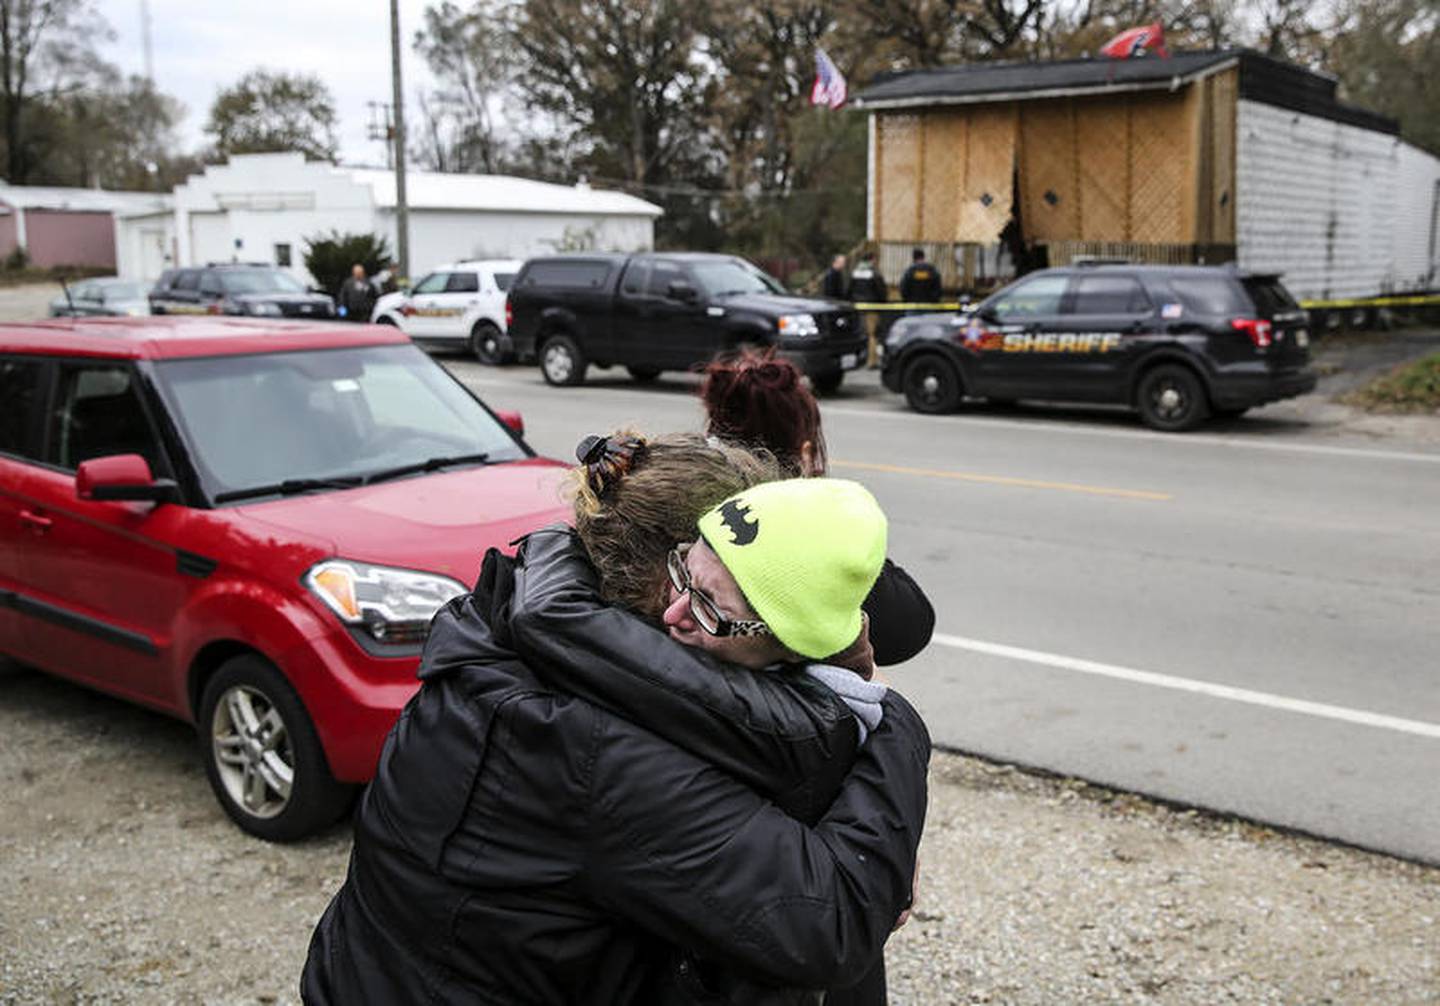 Marie Roche (right) and friends of Kaitlyn Kearns, a 24-year-old bartender from Joliet, hug each other Thursday, Nov. 16, 2017, along East Washington Street as county investigators search the clubhouse belonging to the Outlaws in Joliet, Ill. Kearns' body was found Thursday in a rural area of Kankakee County, according to a sheriff’s office news release.